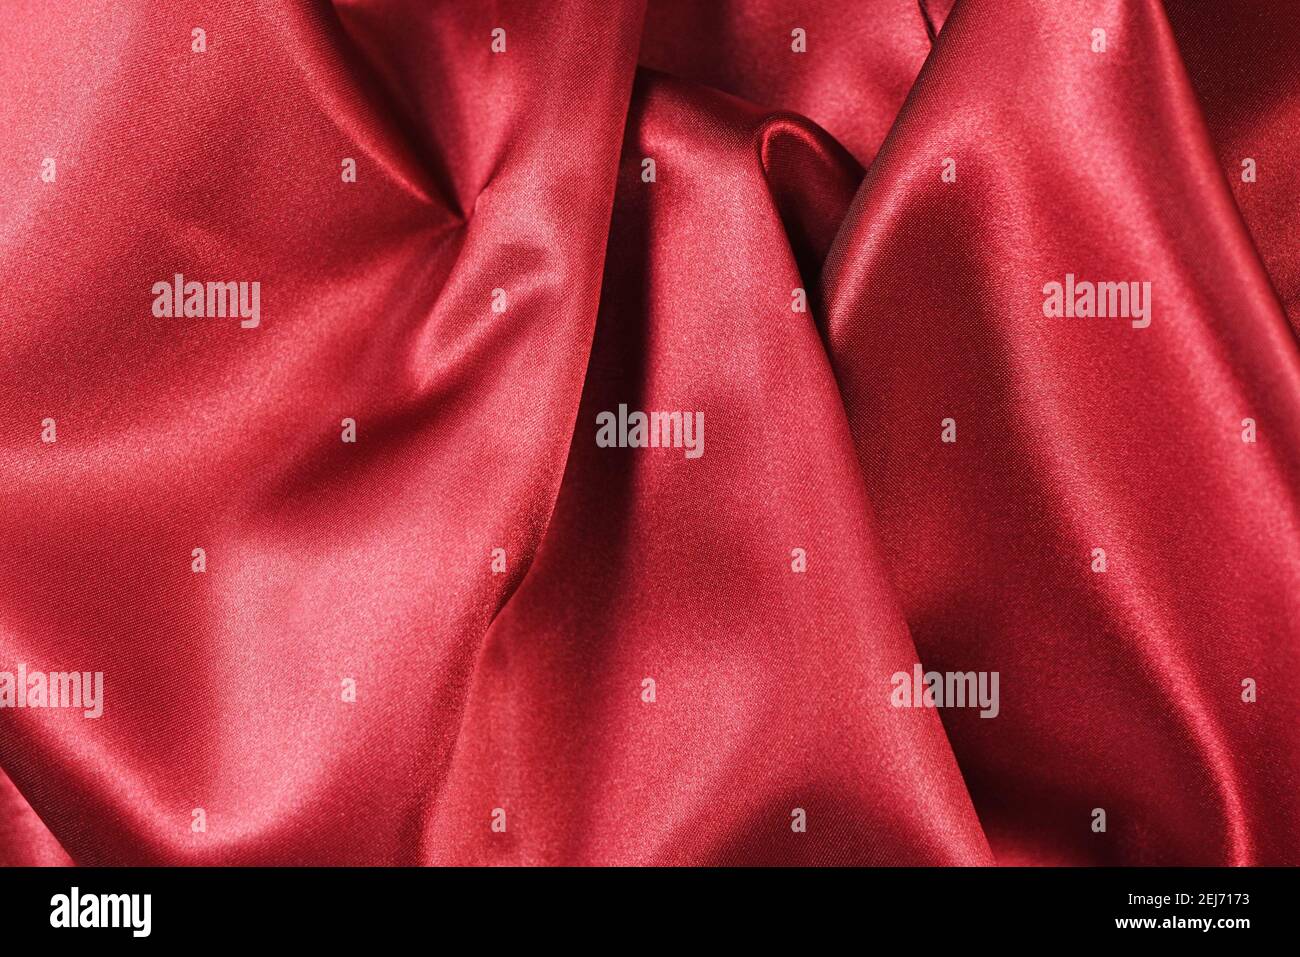 Shiny red satin textile texture with folds Stock Photo